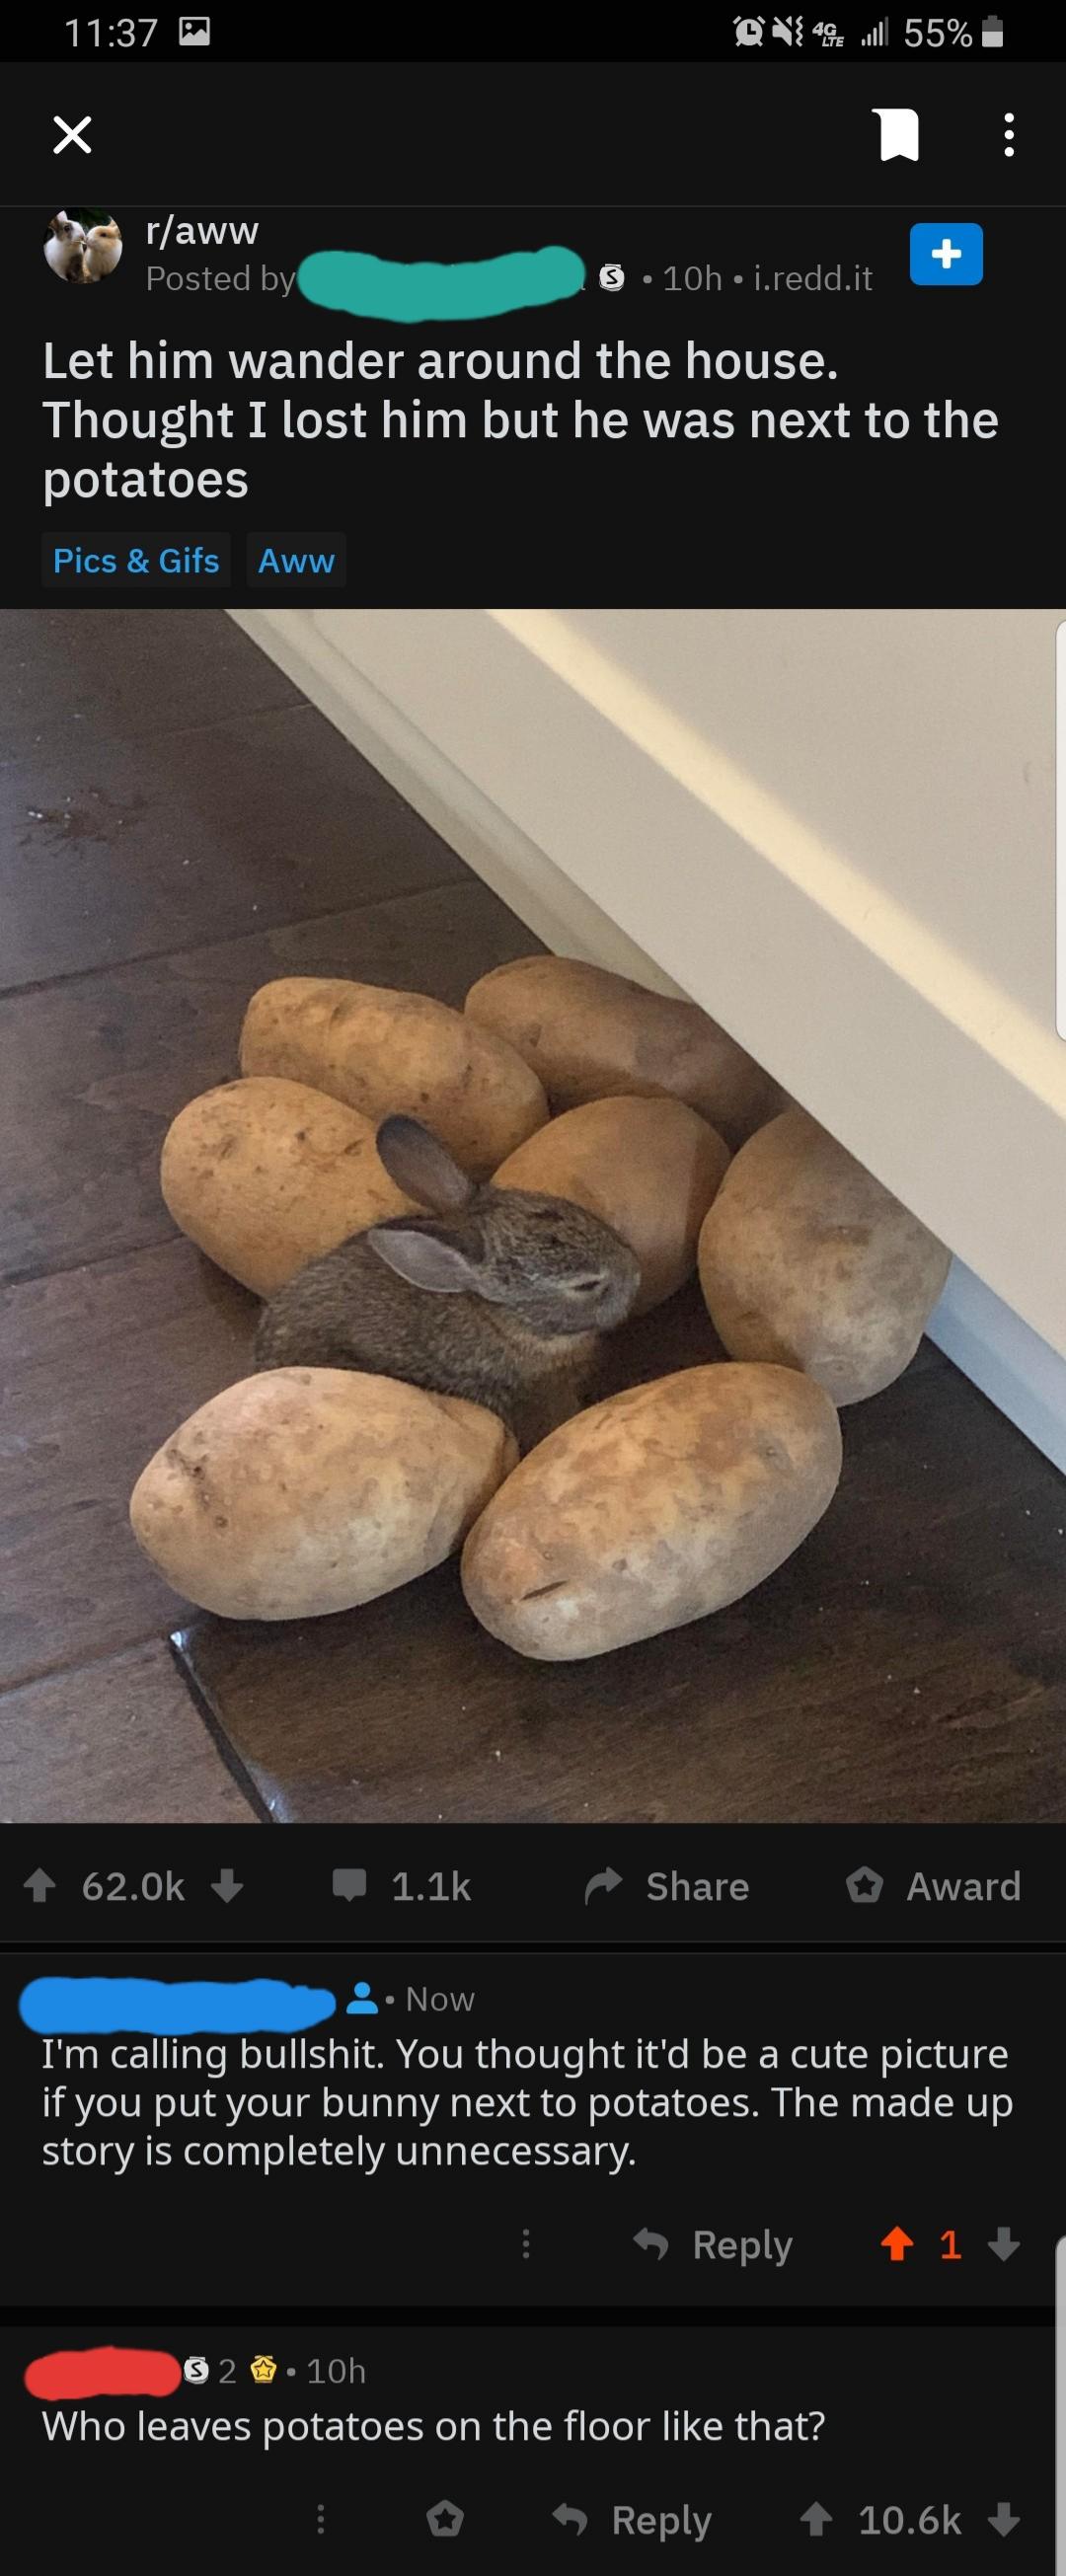 Bullshitters called out - bunny and potatoes - P Din 4Il 55% raww Posted by 3 10h j.redd.it Let him wander around the house. Thought I lost him but he was next to the potatoes Pics & Gifs Aww Award Now I'm calling bullshit. You thought it'd be a cute pict